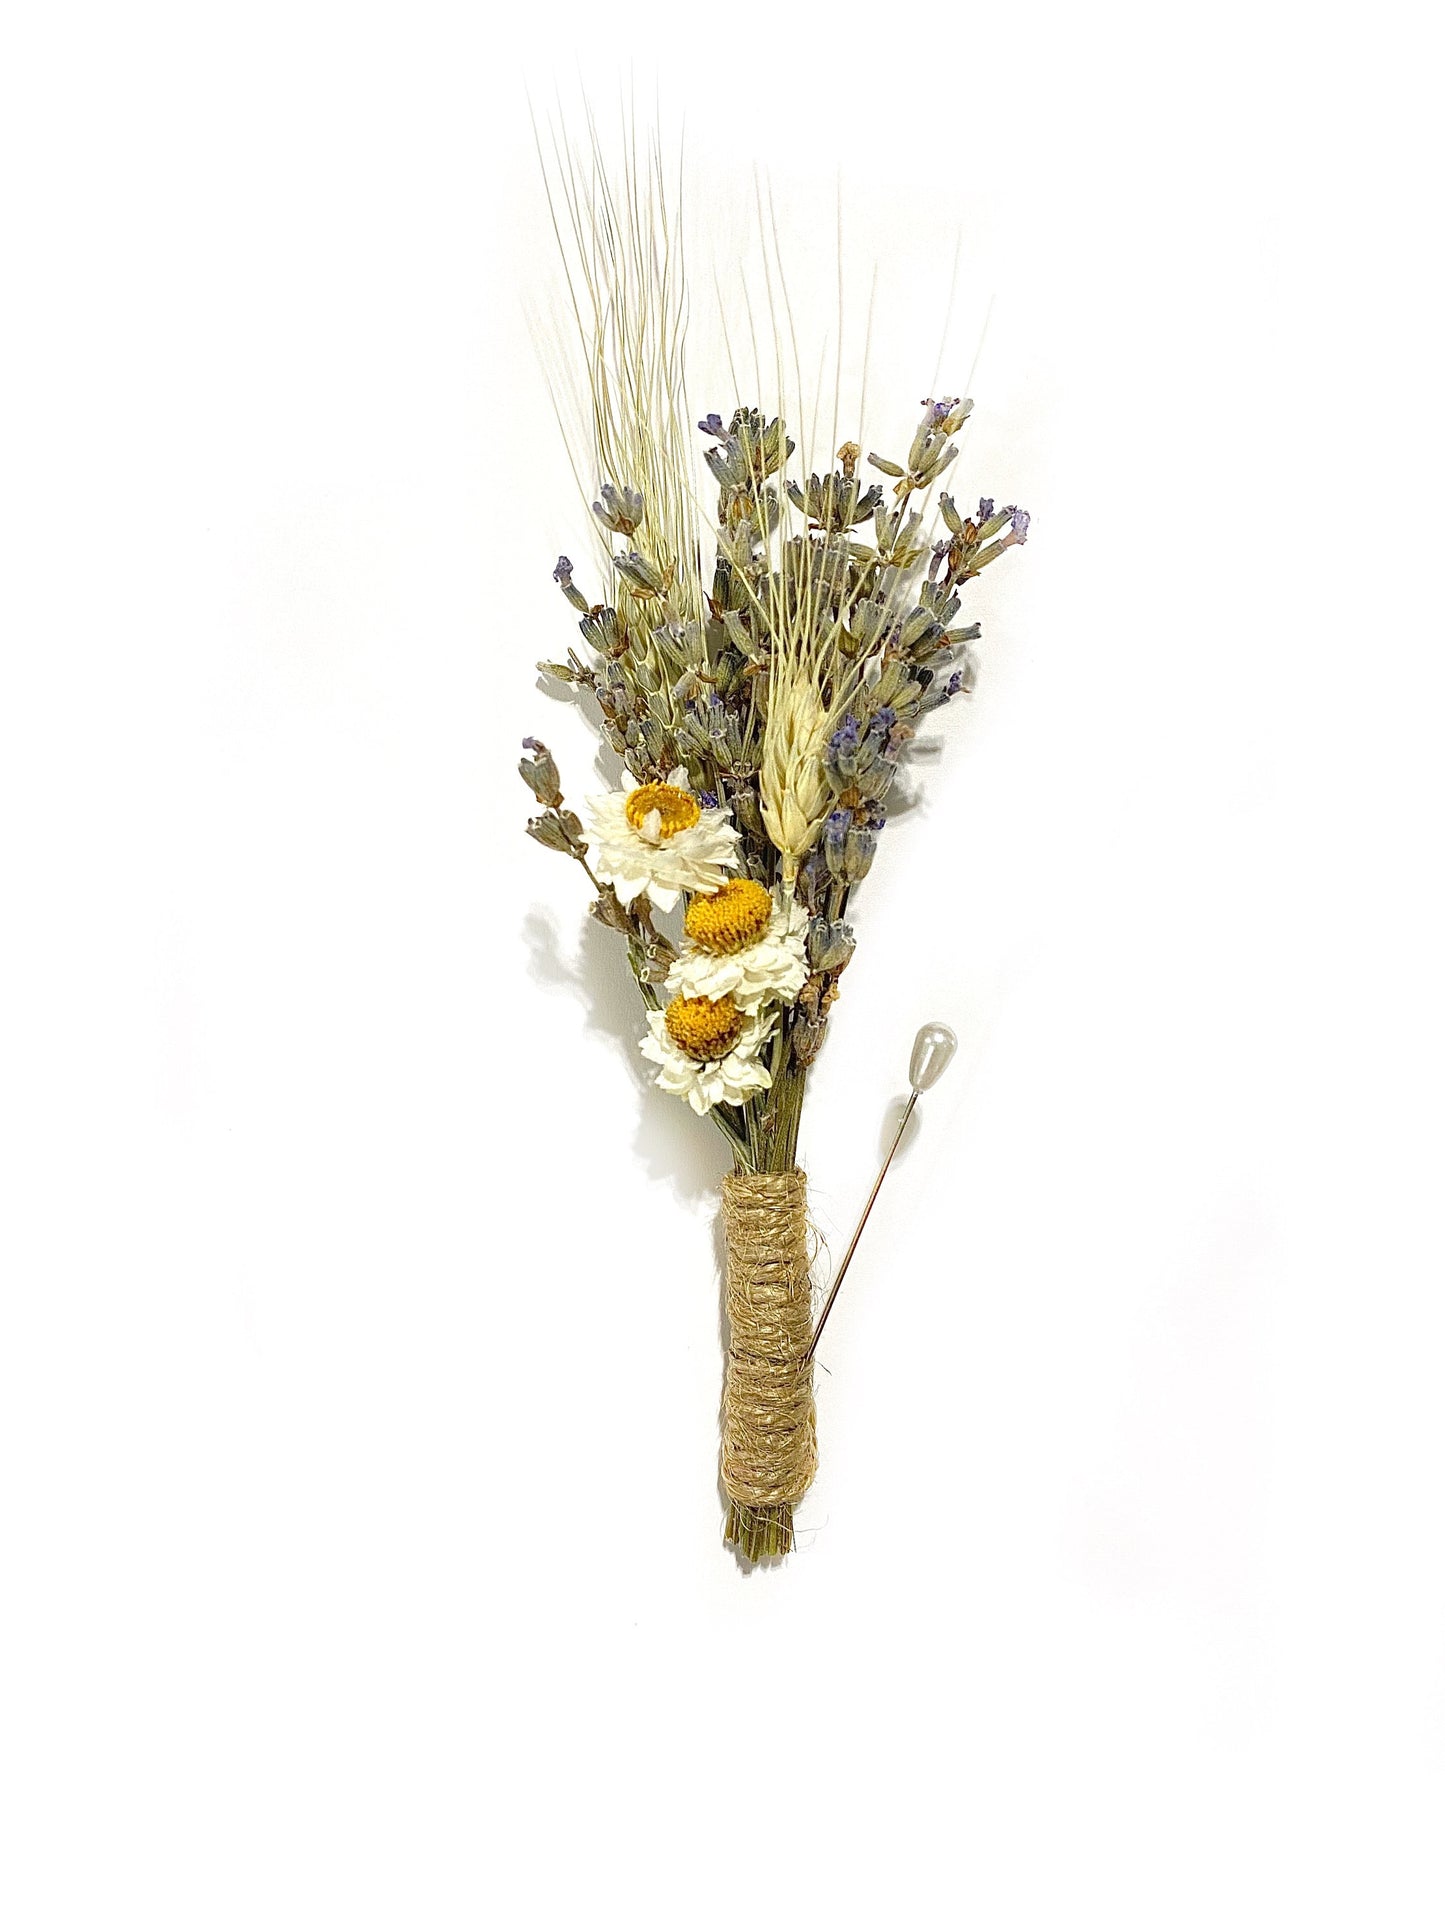 Wedding Bouquet, Lavender, Wheat, Country, Rustic, Bridal, Ammobium, Preserved Flowers, Dried Flower Bouquet, Summer